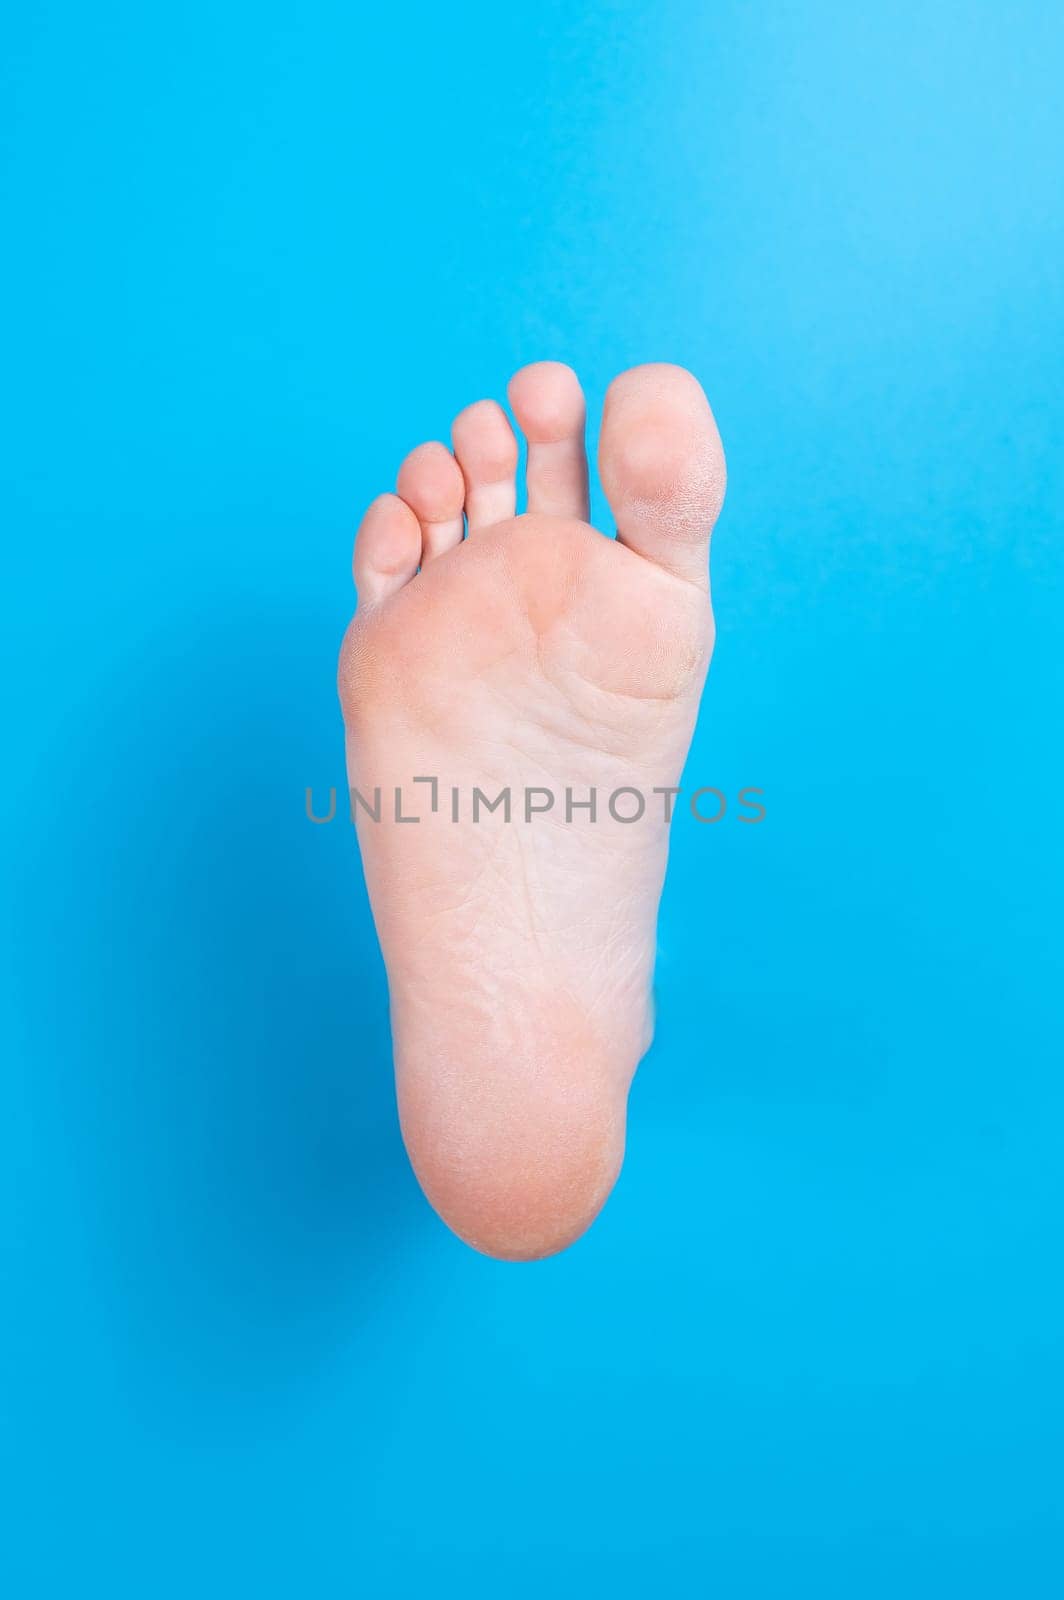 Female bare foot on a blue background. by mrwed54